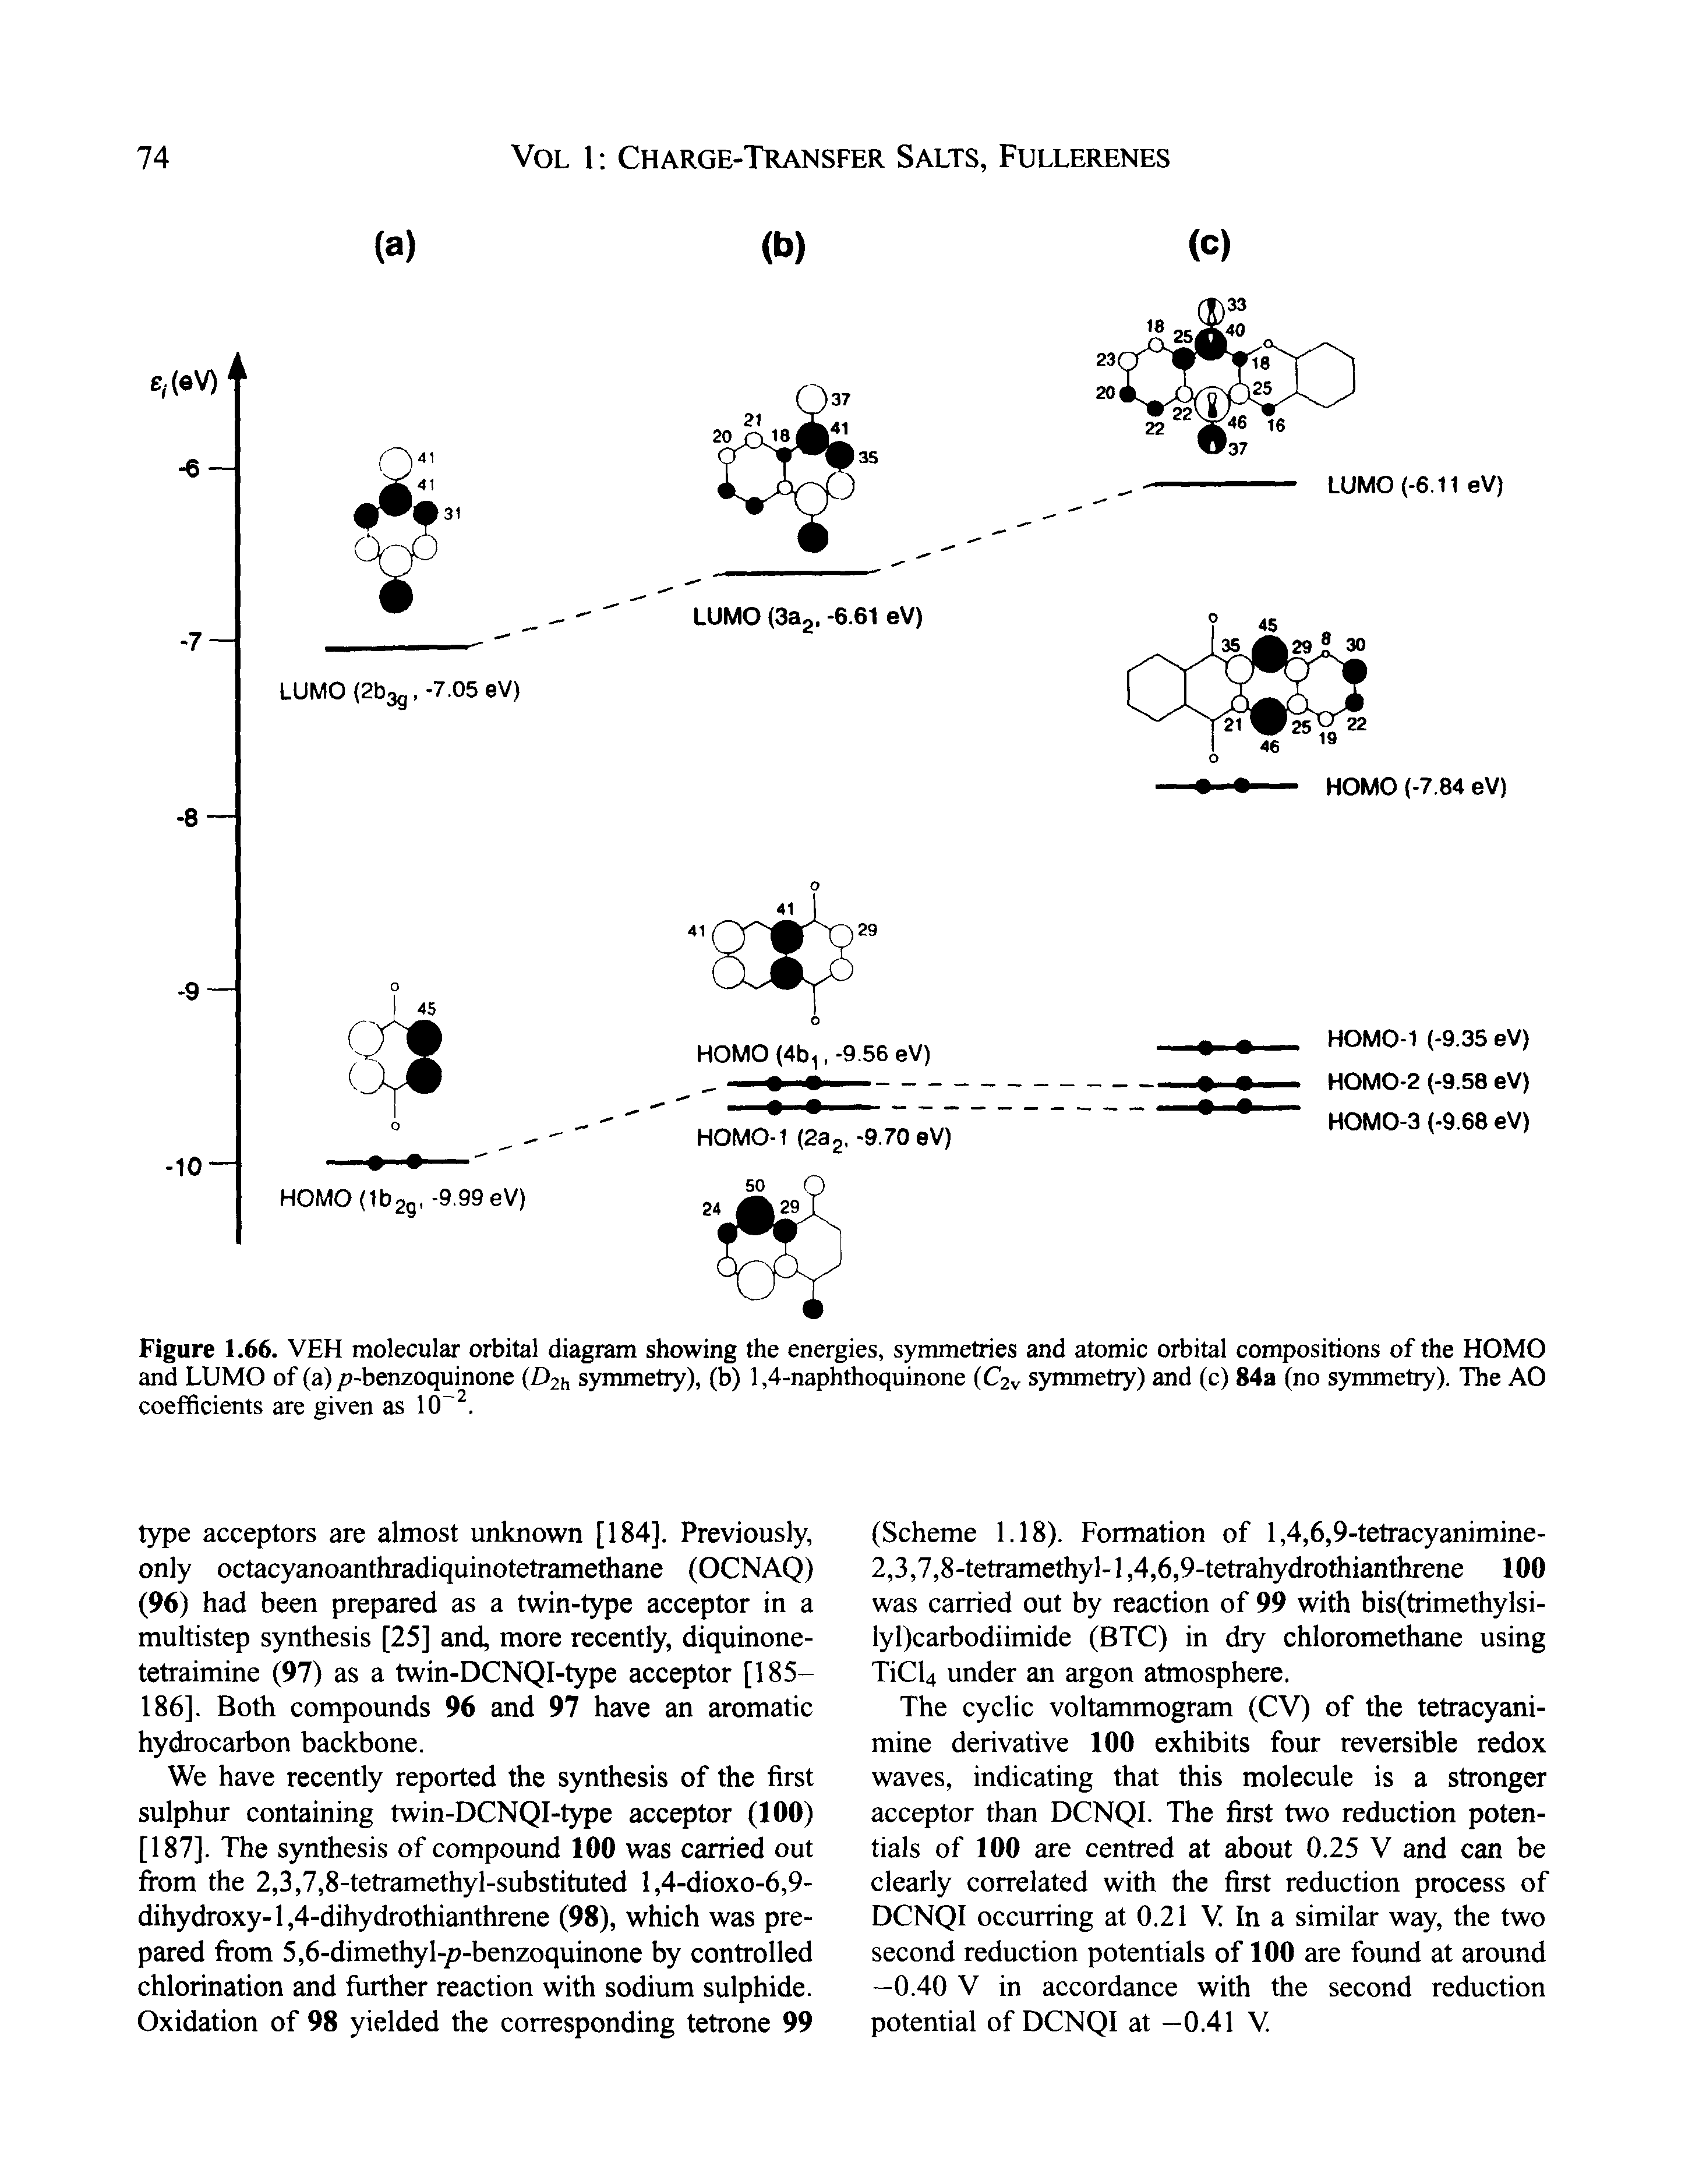 Figure 1.66. VEH molecular orbital diagram showing the energies, symmetries and atomic orbital compositions of the HOMO and LUMO of (a) / -benzoquinone (D2h symmetry), (b) 1,4-naphthoquinone (C2v symmetry) and (c) 84a (no symmetry). The AO coefficients are given as 1(). ...